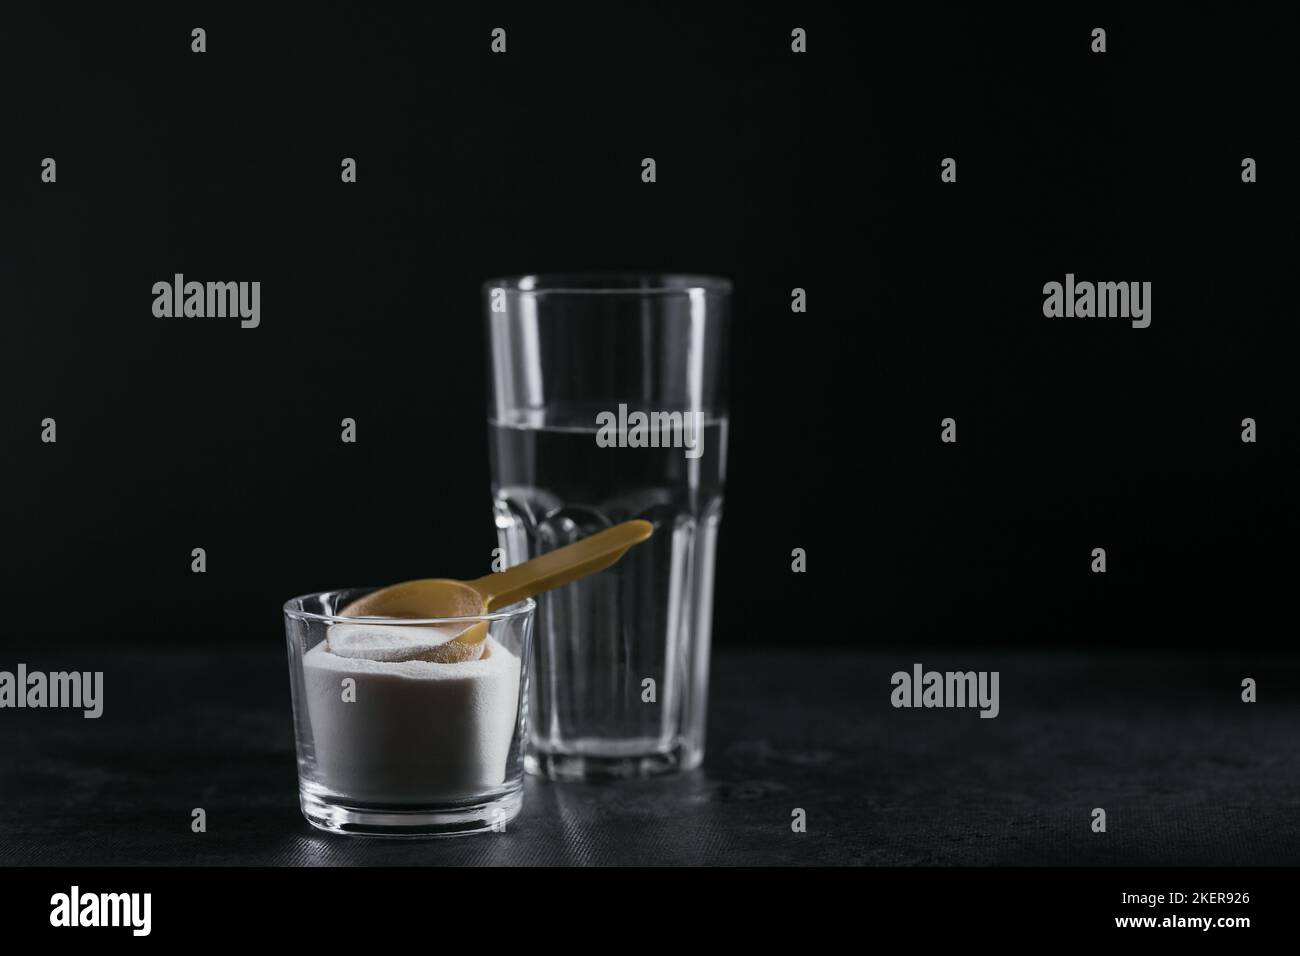 Collagen powder in bowl, glass of water and measure spoon on black background Stock Photo